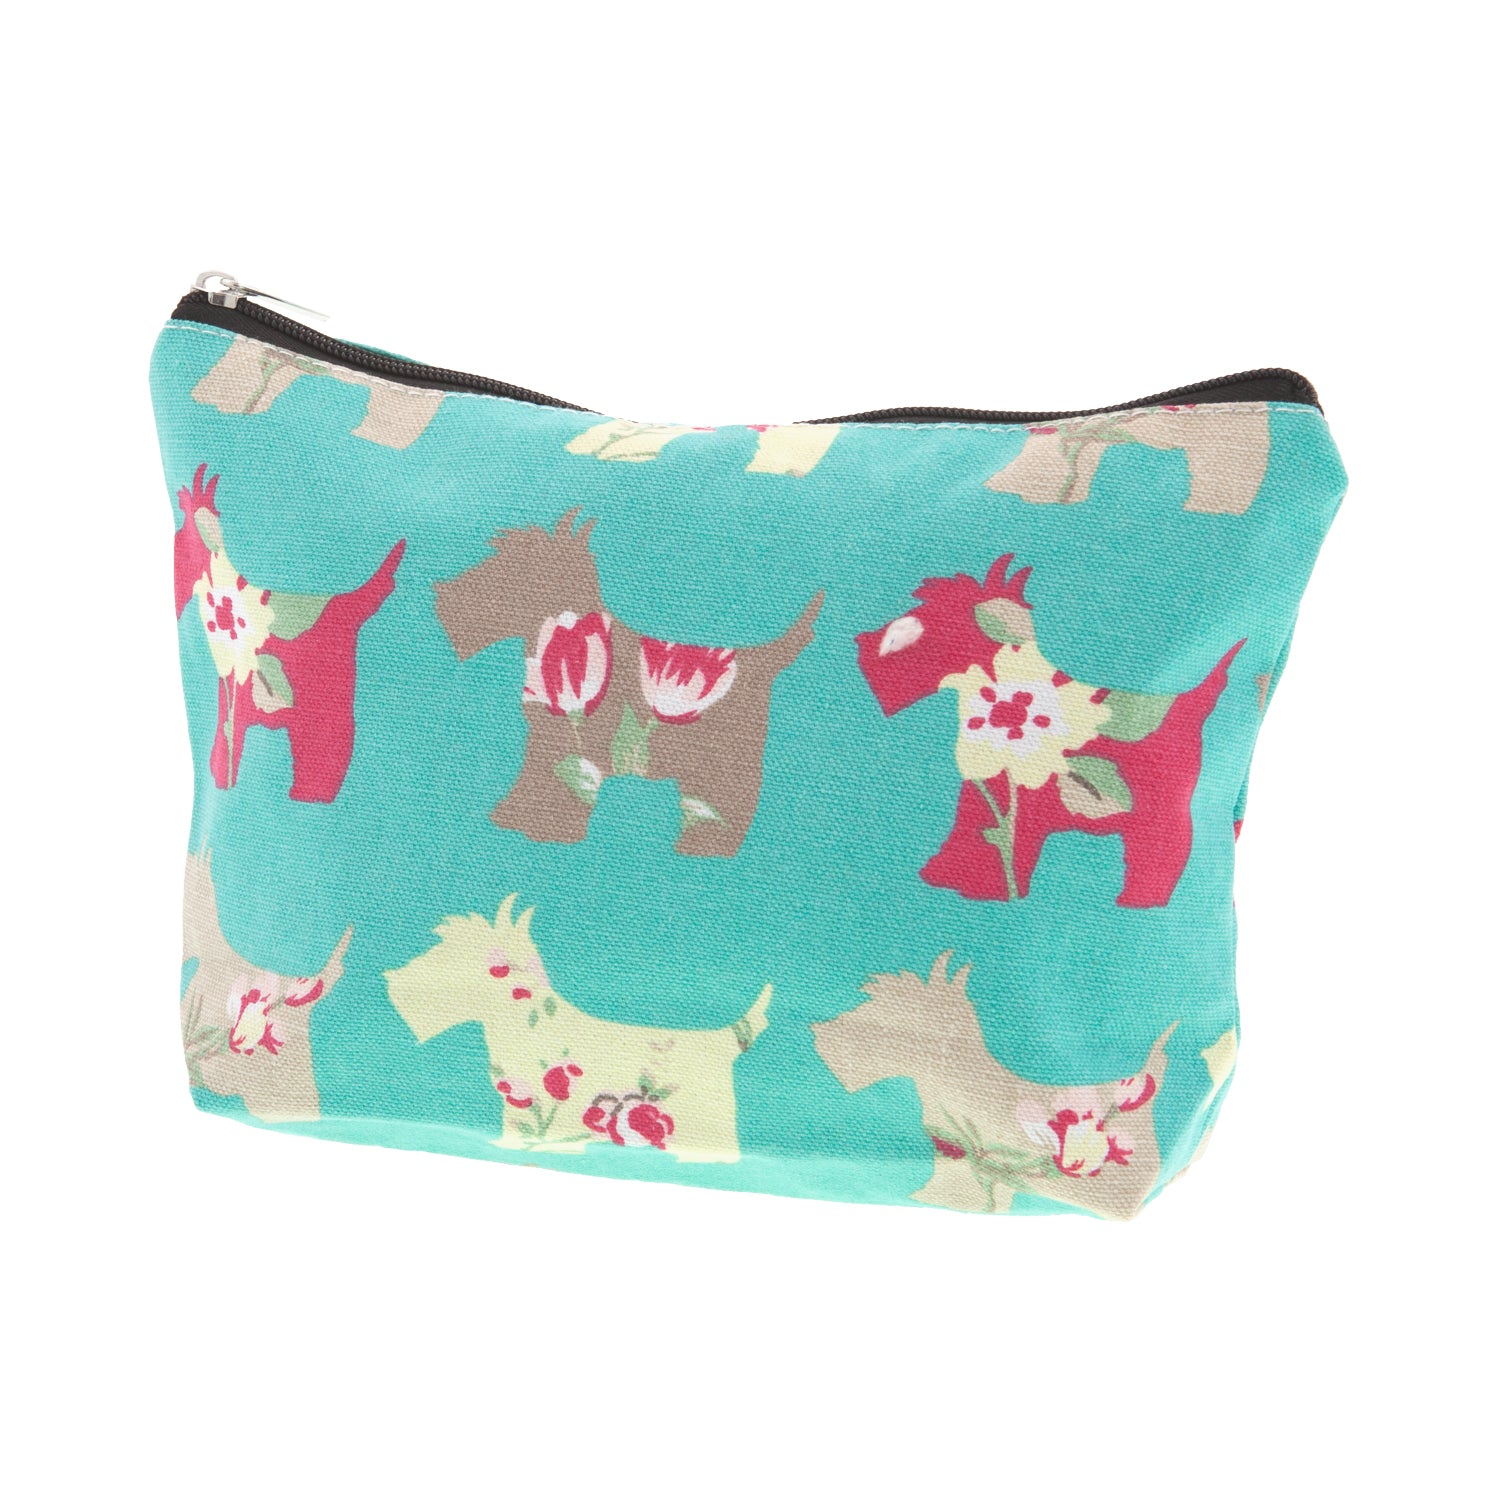 Dog Krazy Gifts – Mint Scottie Dog Cosmetic Bag, part of the Scottish Terrier range of products available from DogKrazyGifts.co.uk